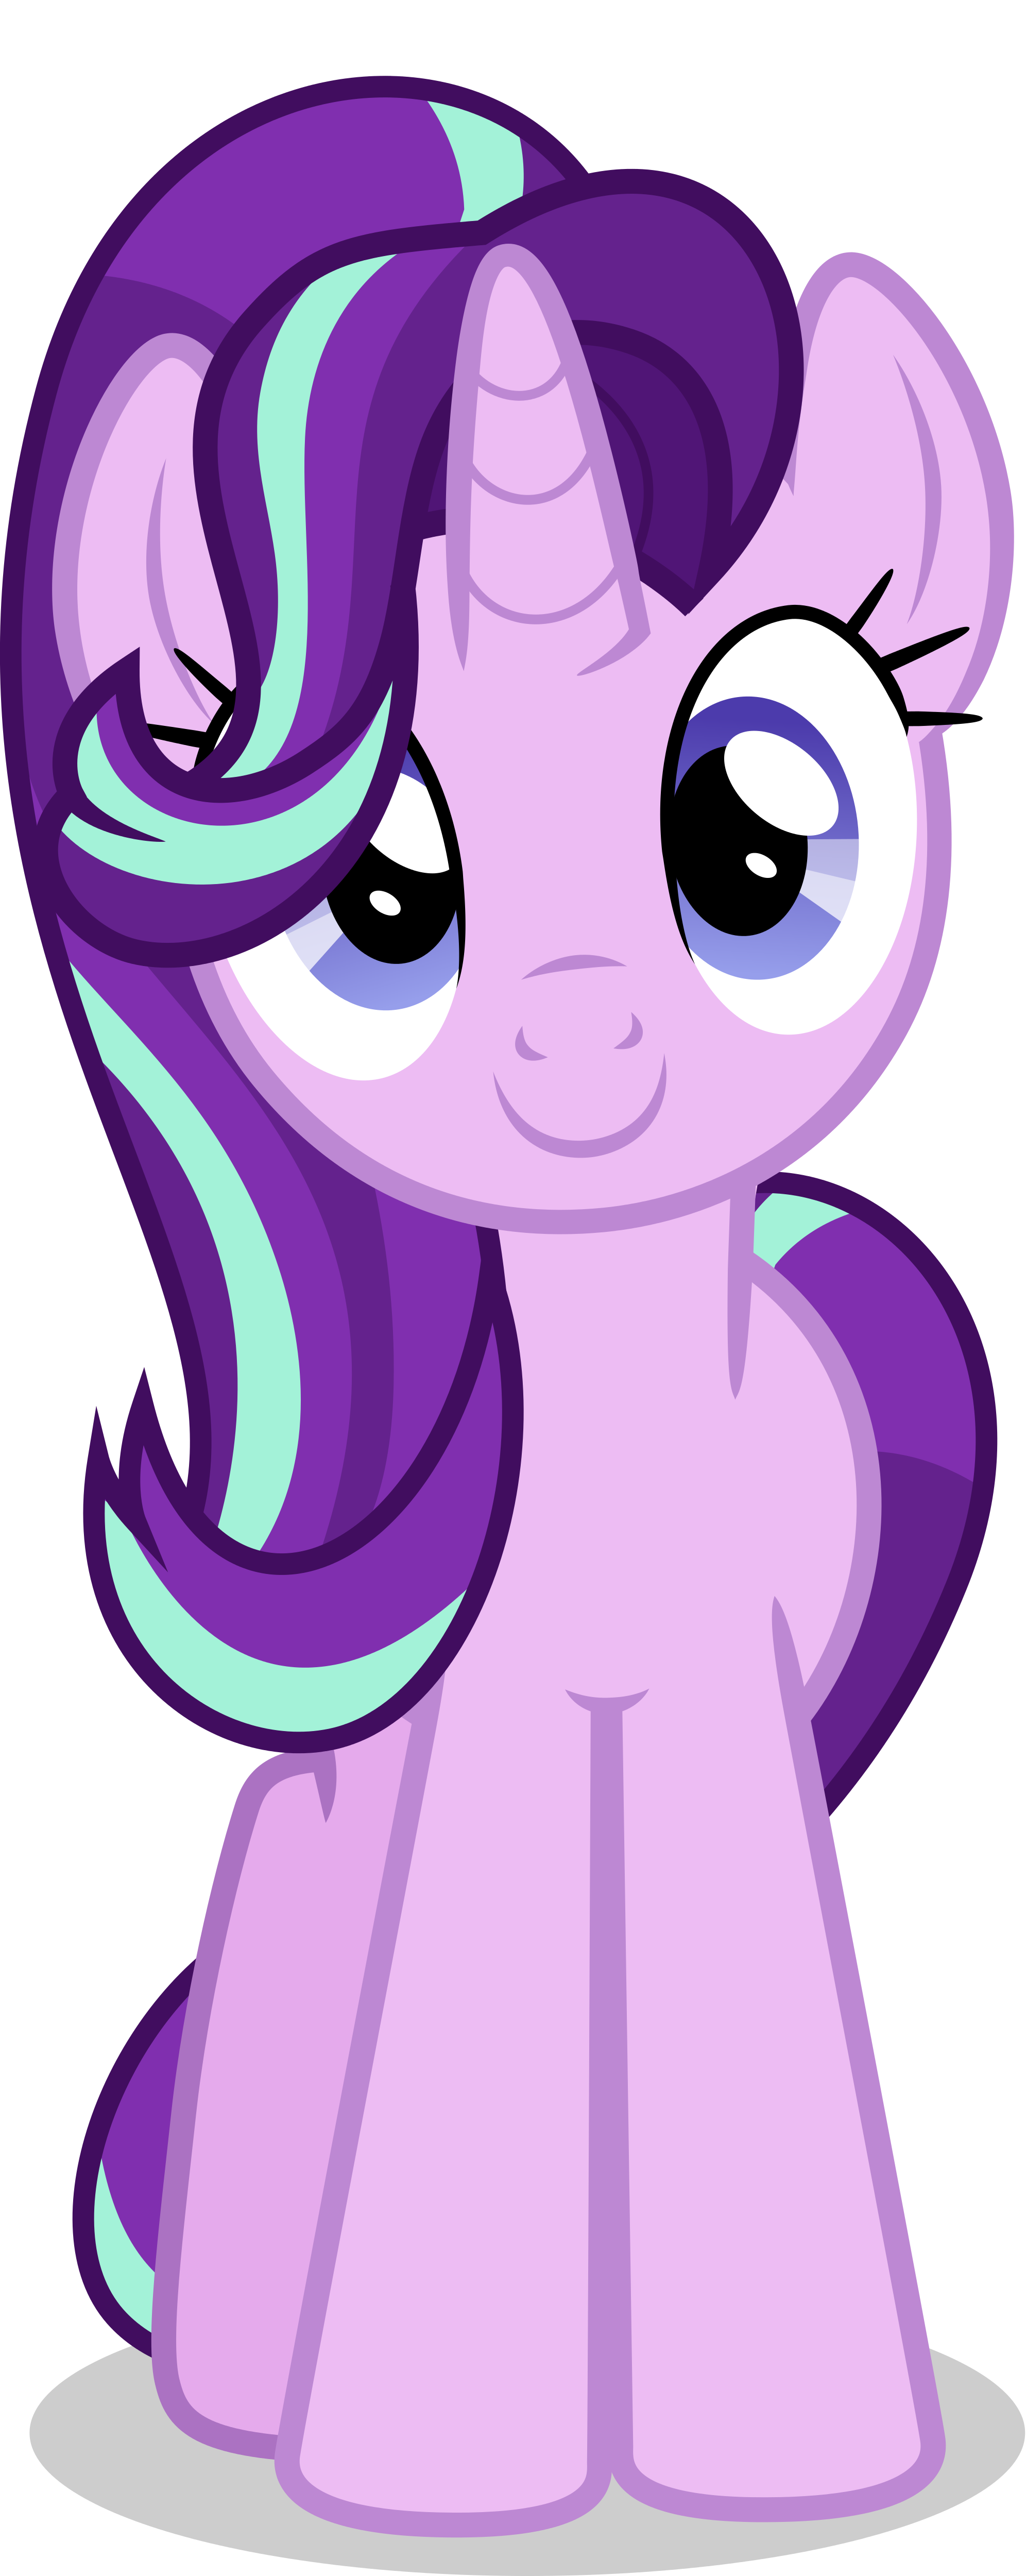 starlight_glimmer_by_xebck-d9u4rob.png